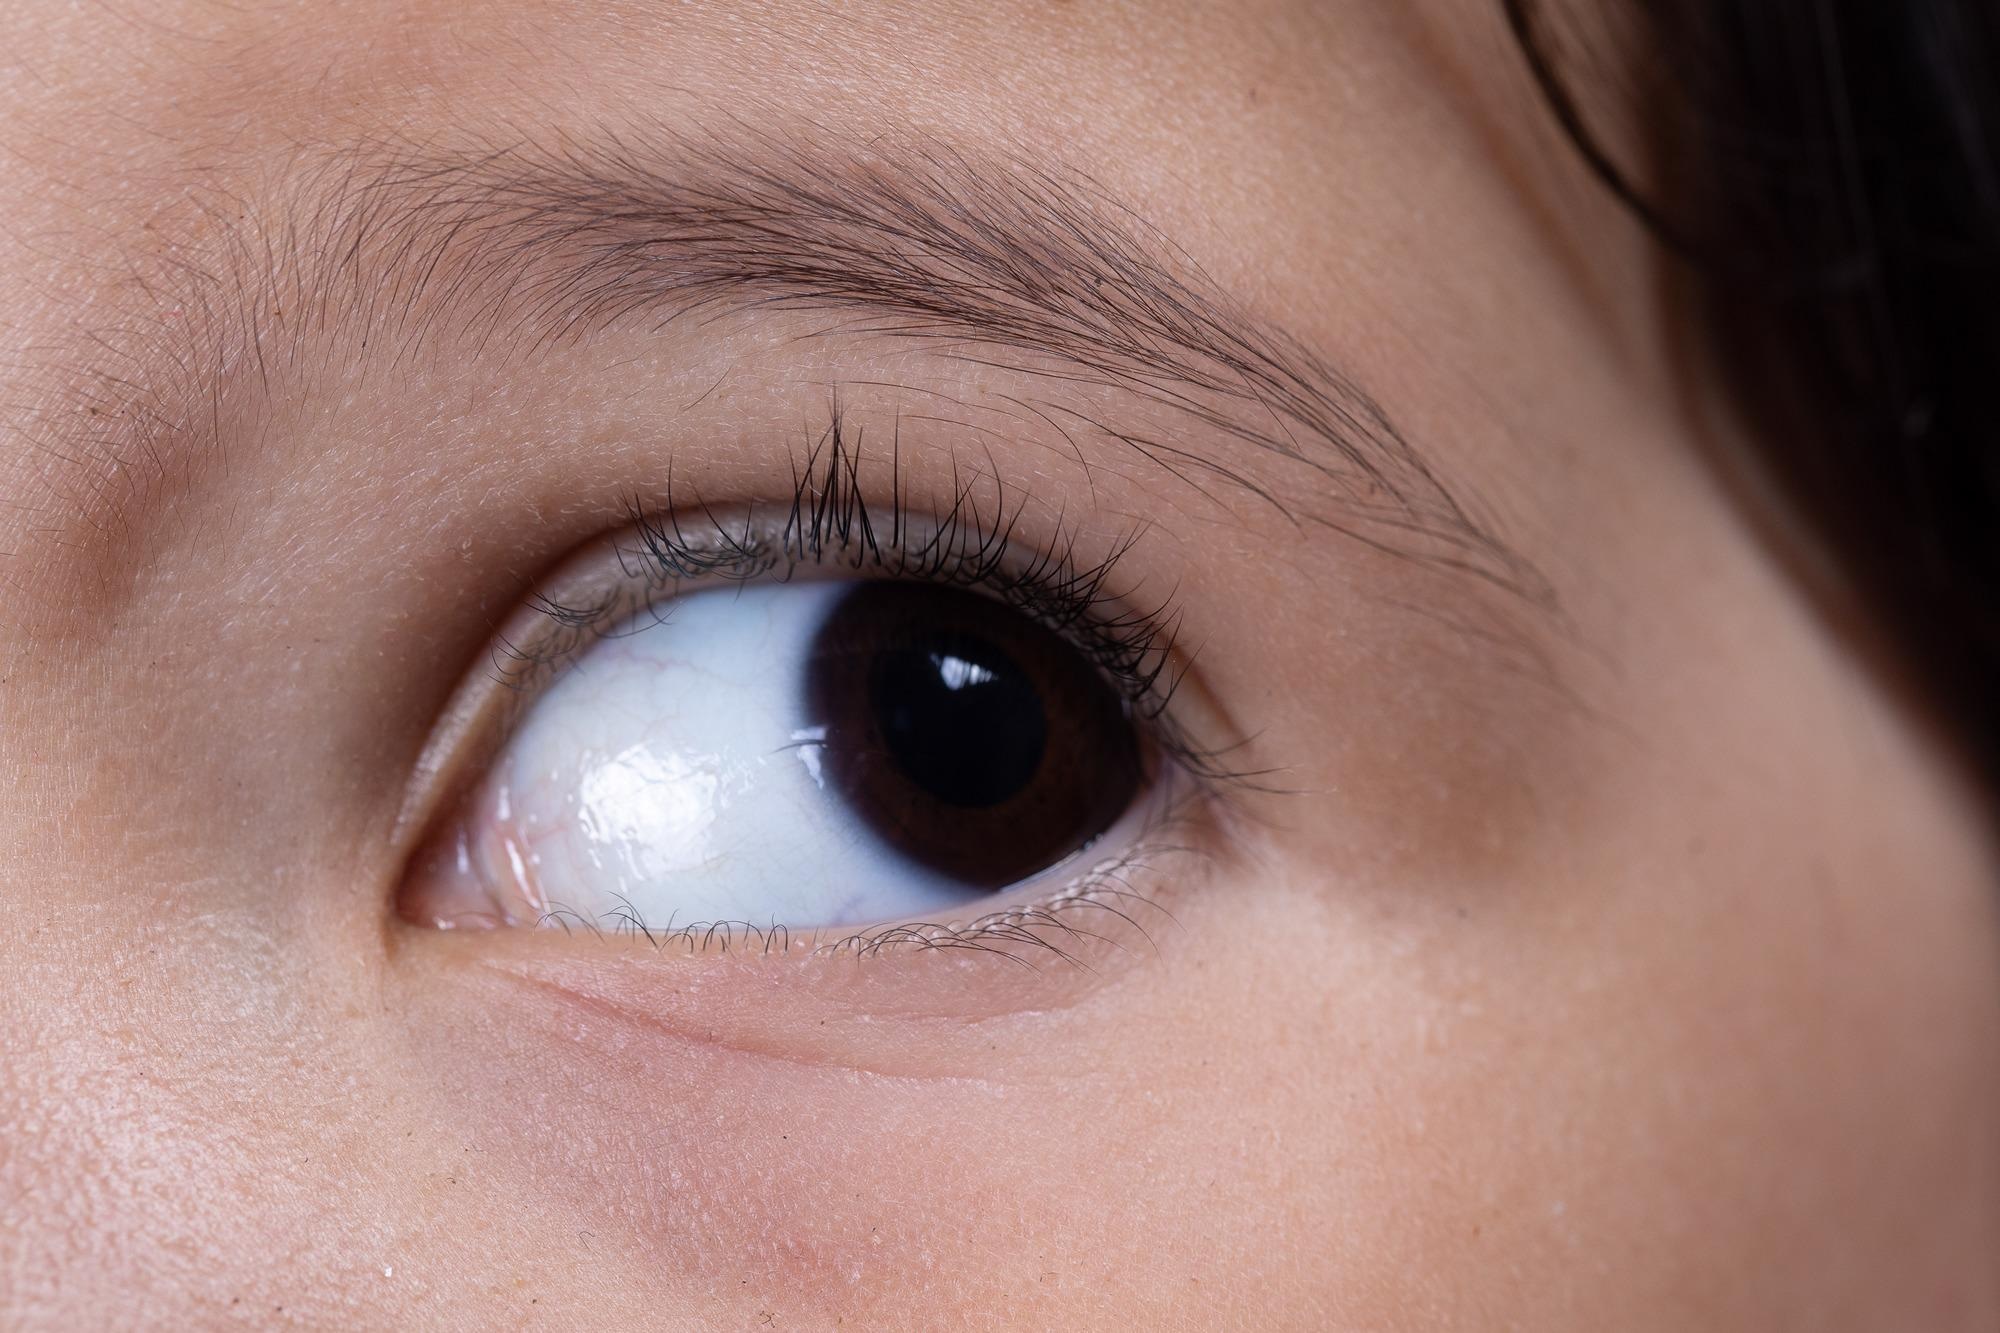 Aniridia - a rare genetic eye disorder that affects the iris. Image Credit: Sruilk / Shutterstock